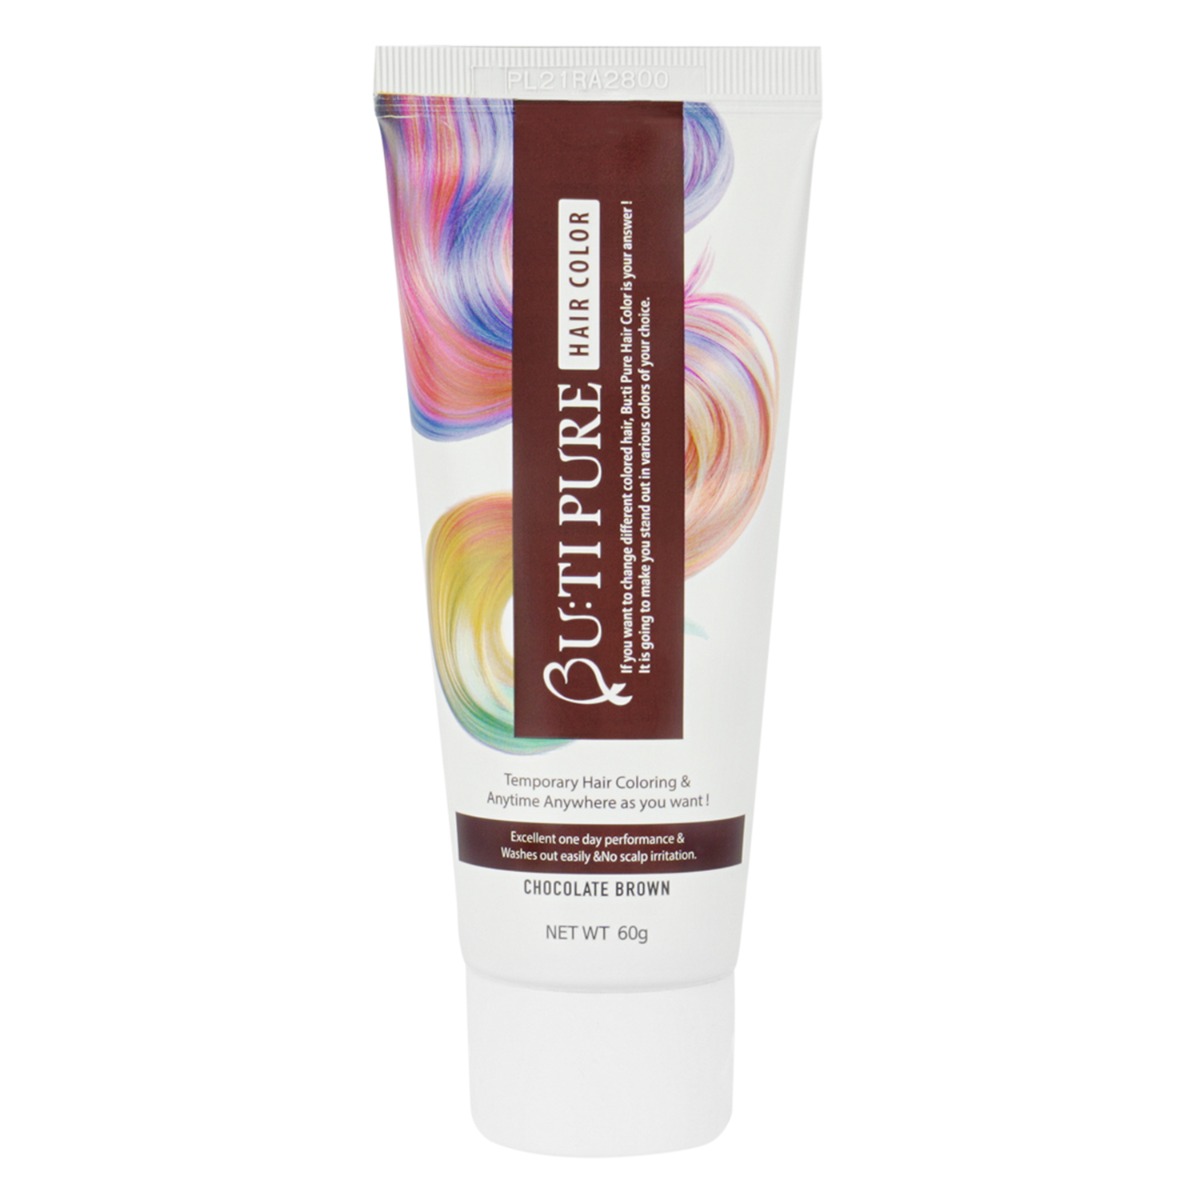 Butipure Chocolate Brown One Day Hair Color, 60gm